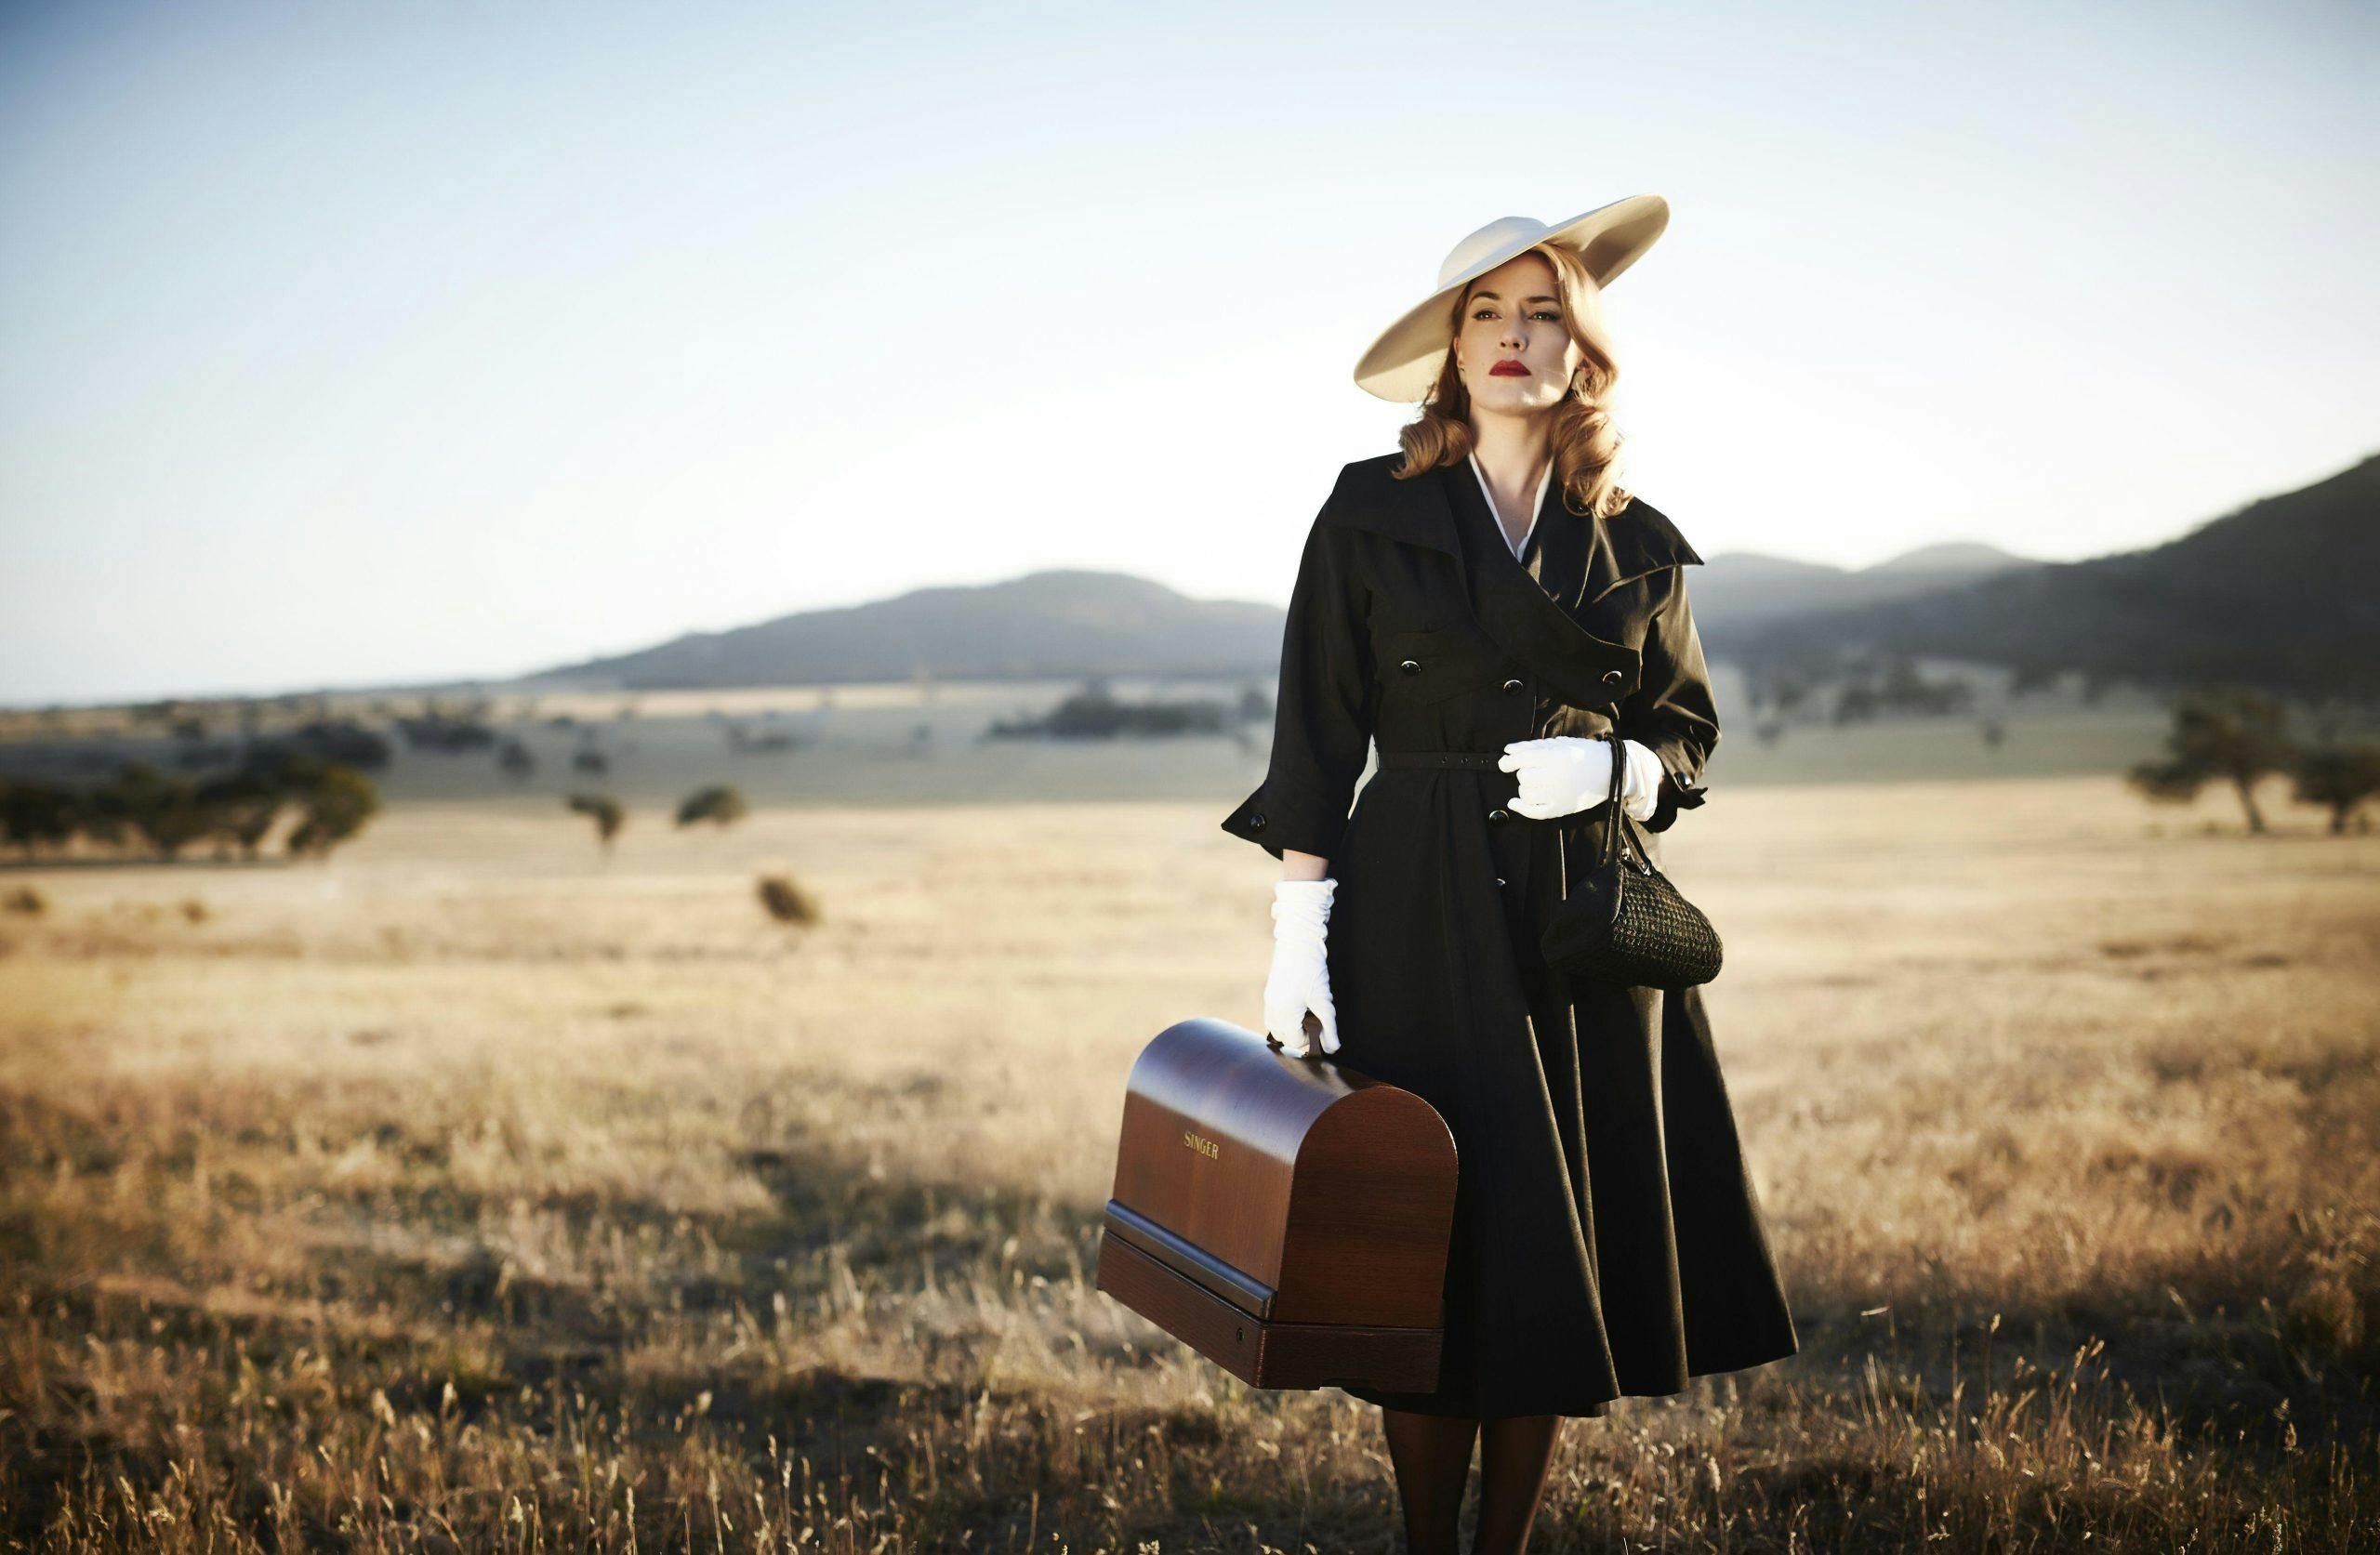 Kate Winslet is dressed in costume as Tilly Dunnage, in a black vintage dress, with white gloves and a white hat. She is standing in front of a field of dry coloured grass, holding a suitcase.